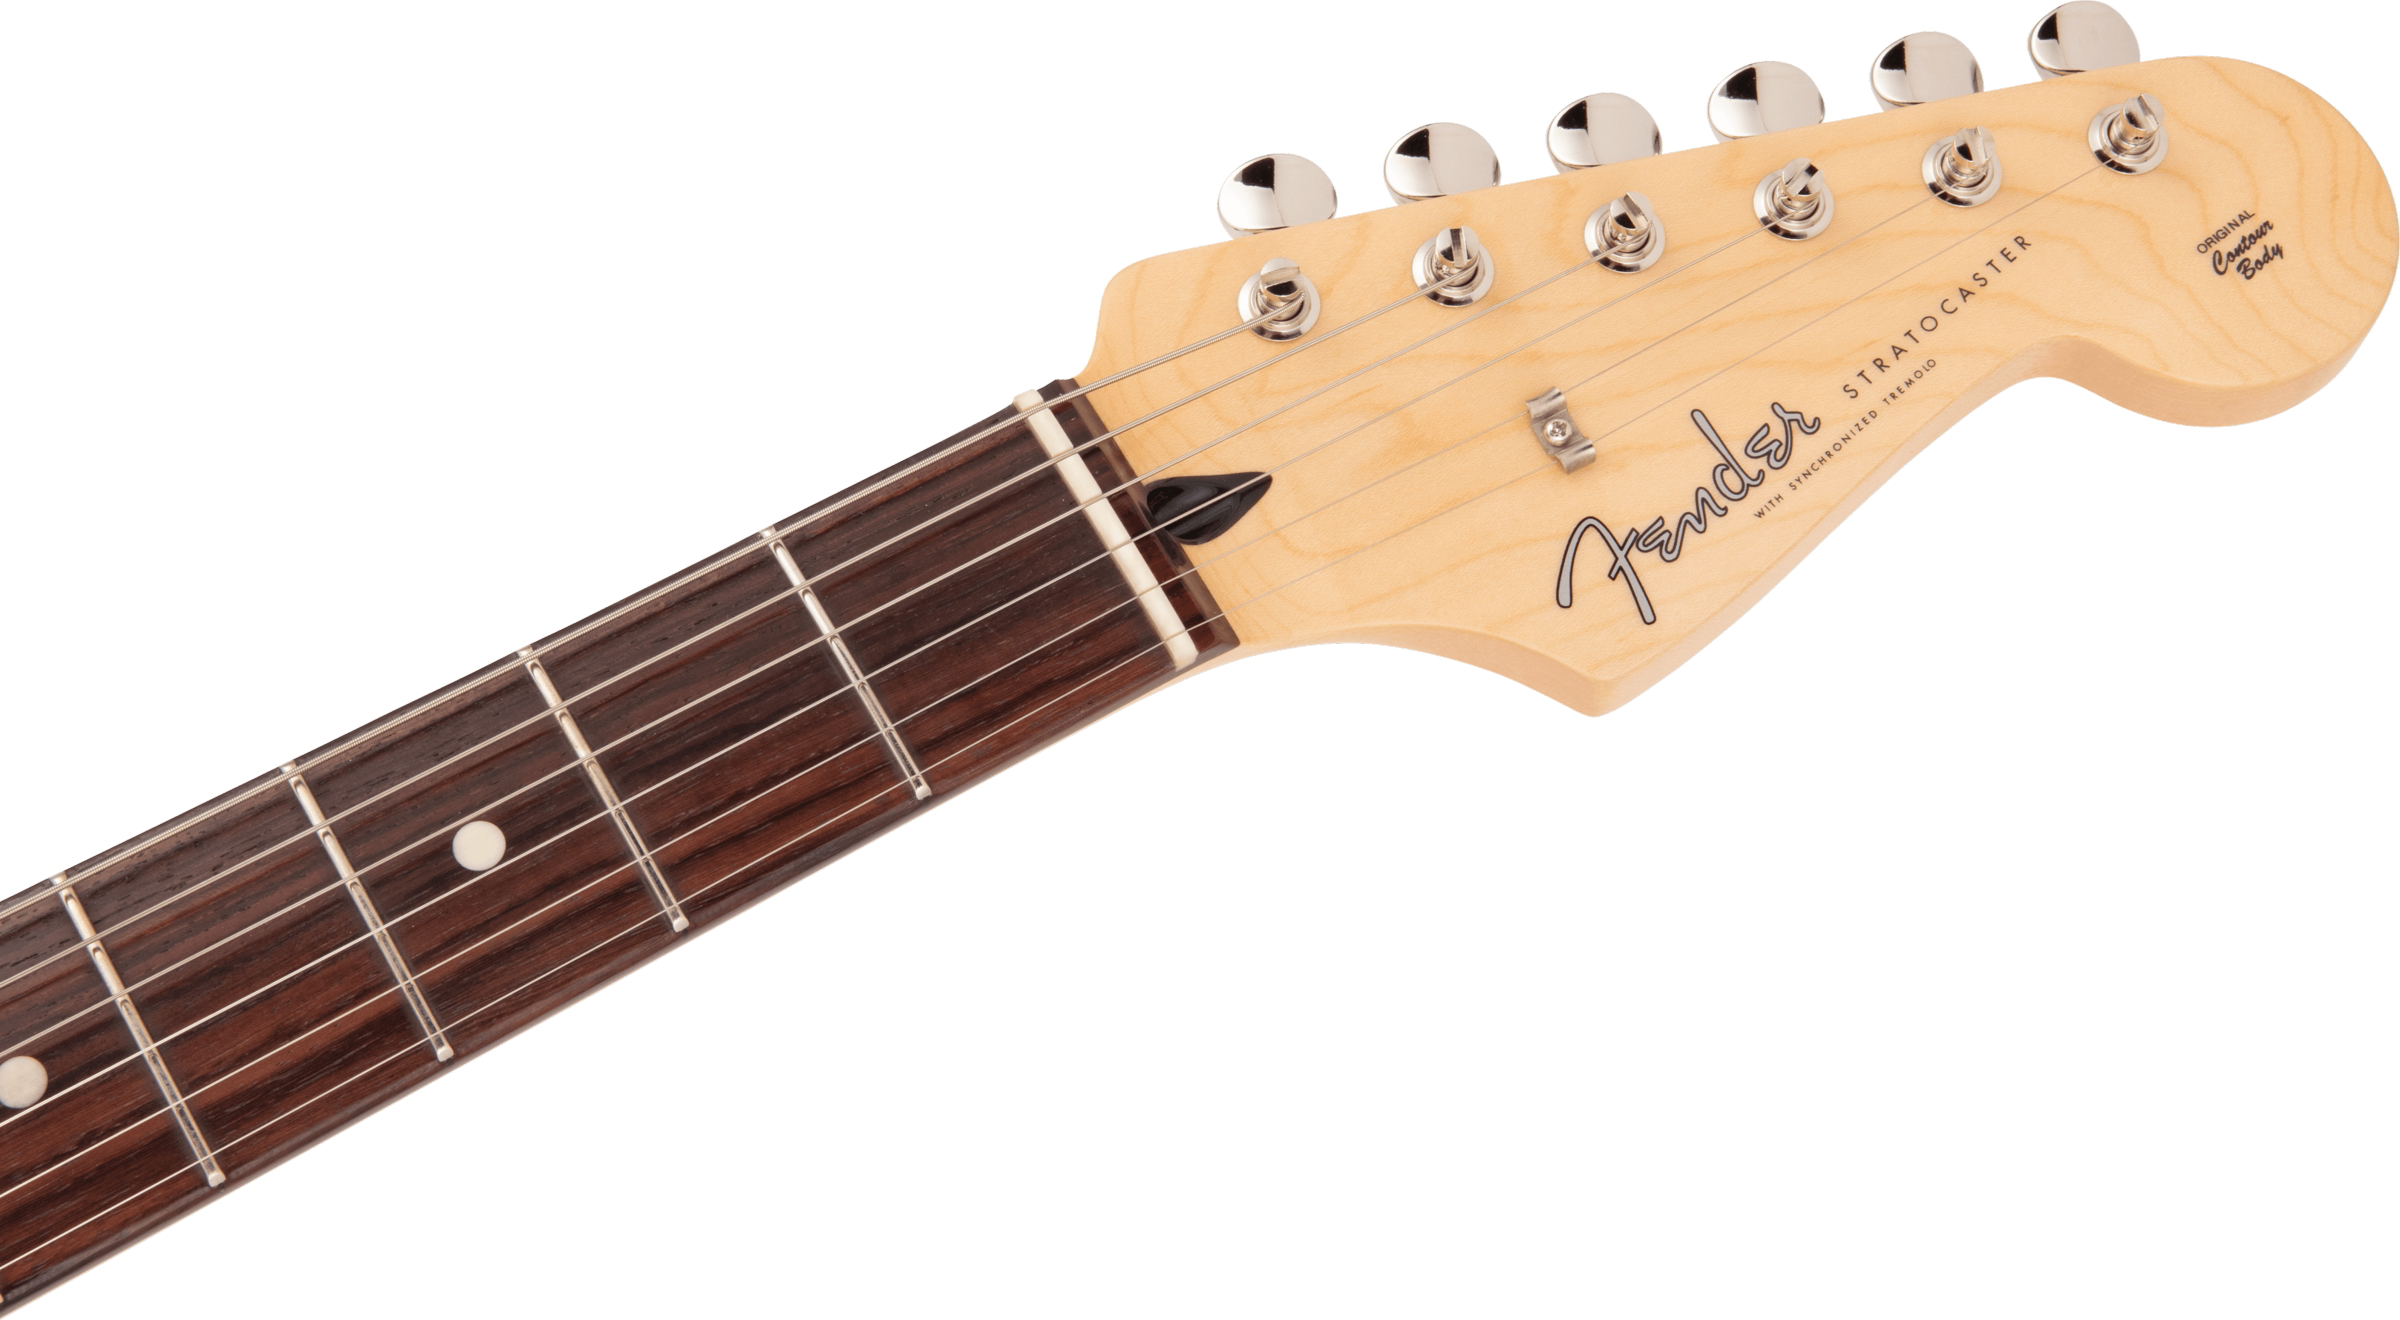 Made in Japan Hybrid II Stratocaster, Rosewood Fingerboard, Modena Red追加画像